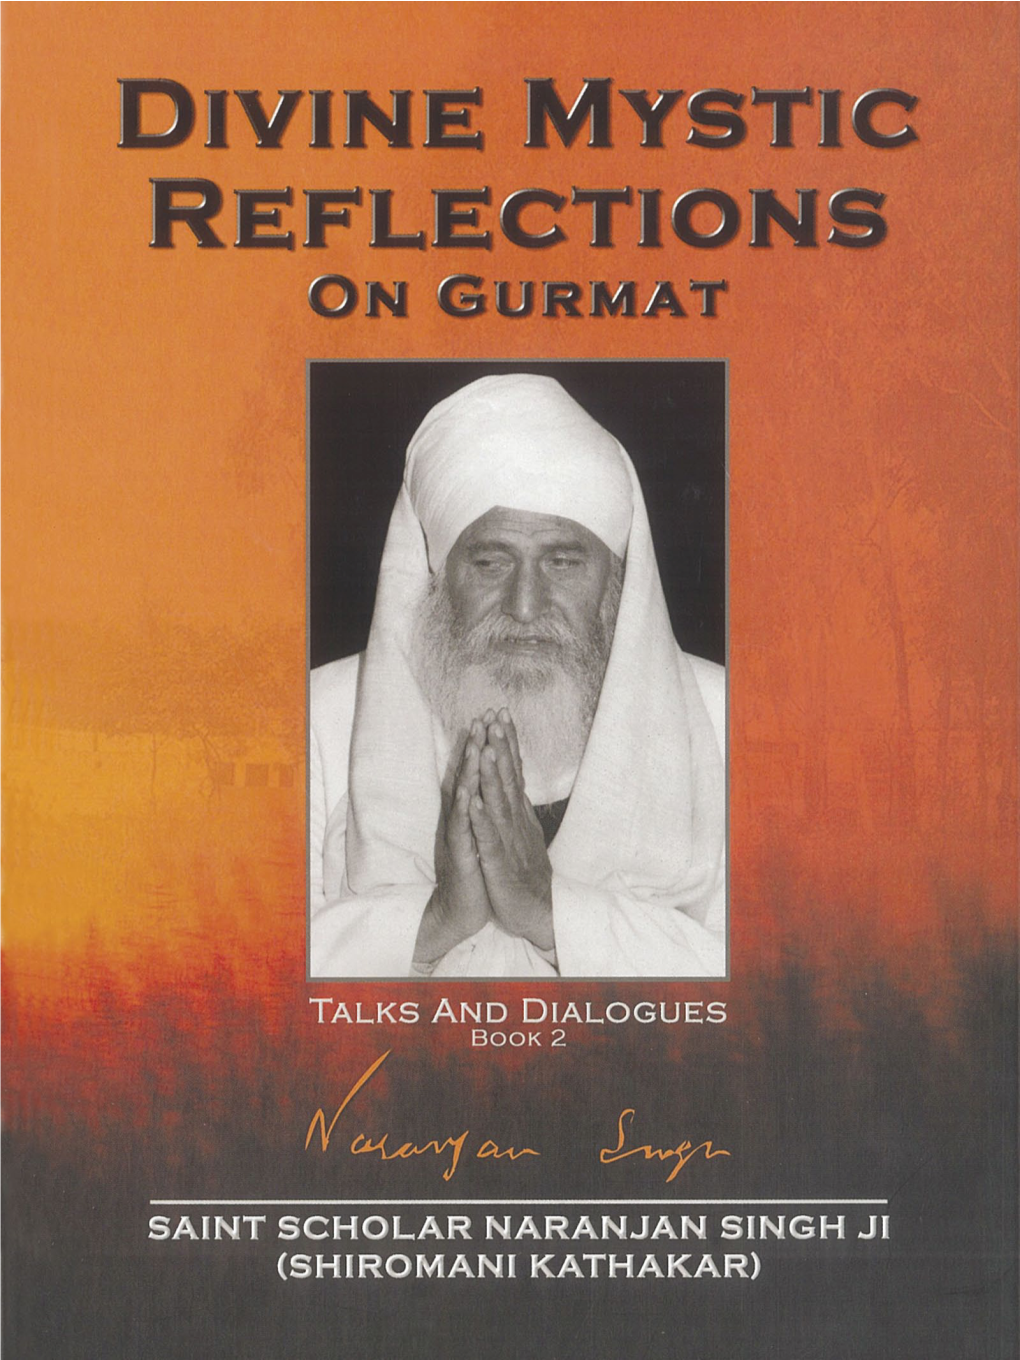 Divine Mystic Reflections on Gurmat Book 2 ISBN: 978 981 250 168 4 First Edition – May 2003 Second Edition - December 2010 Ebook Version 1.0 - May 2015